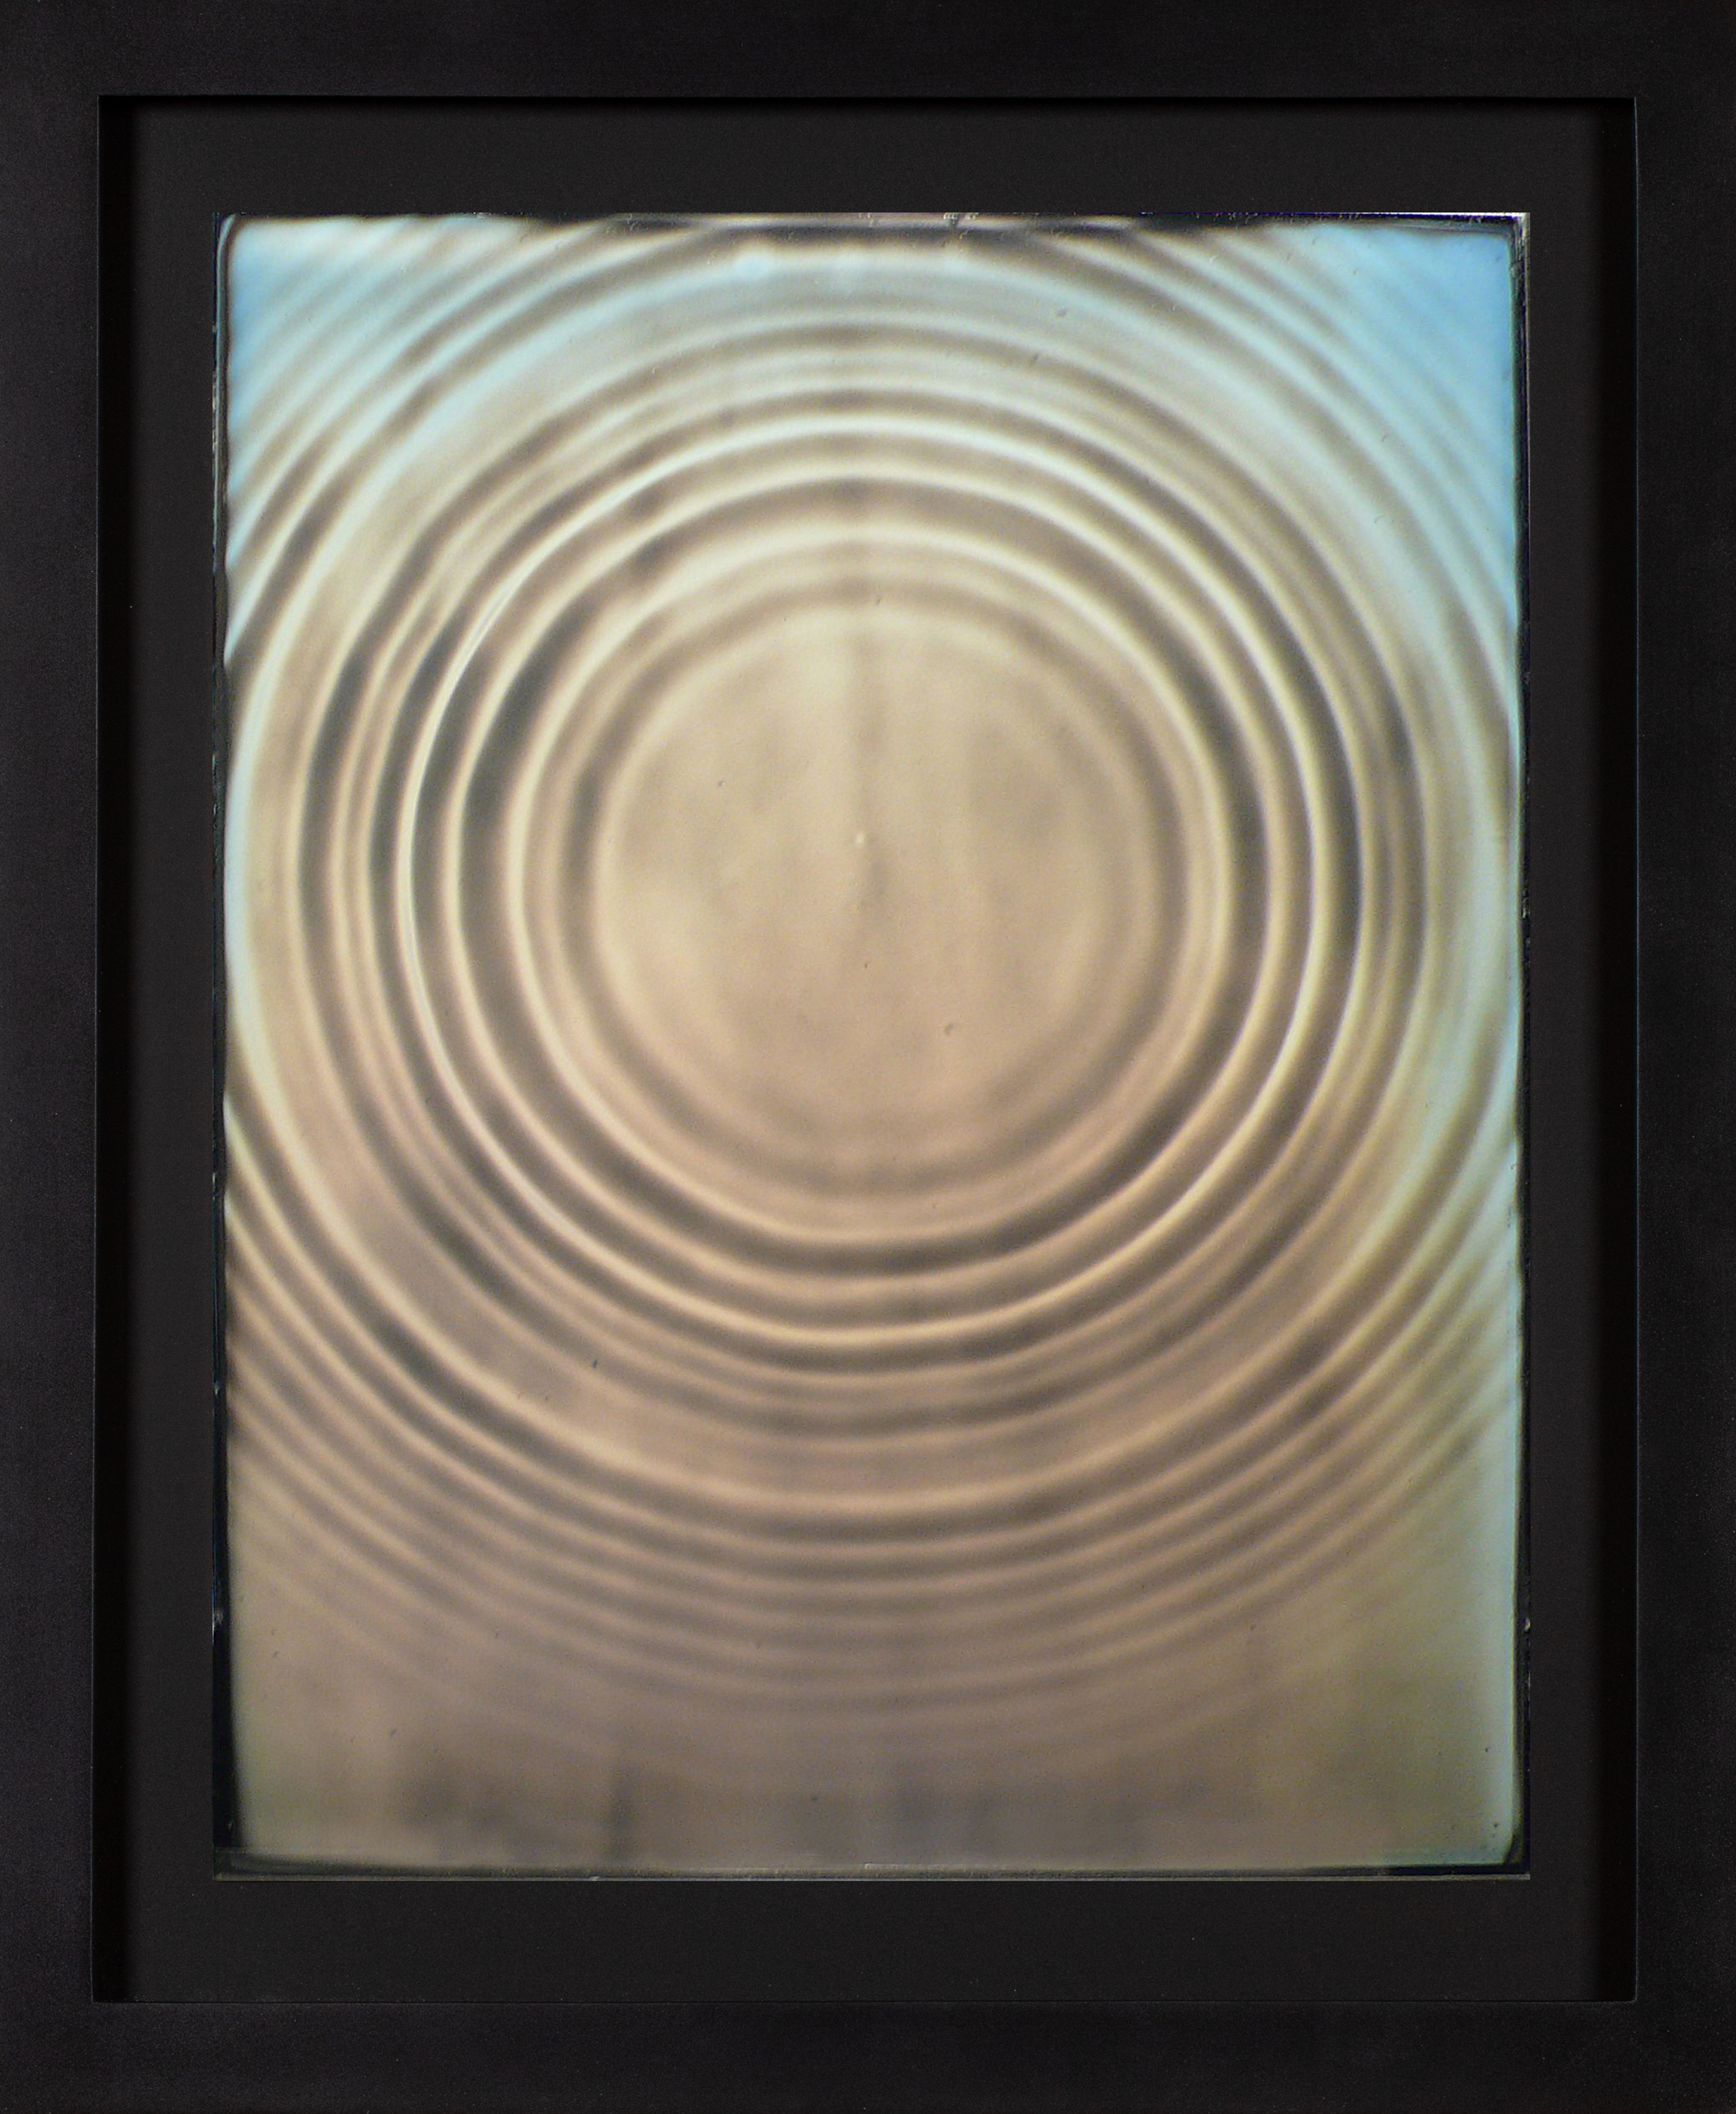 Color image of a daguerreotype depicting the motion of a water droplet framed in black